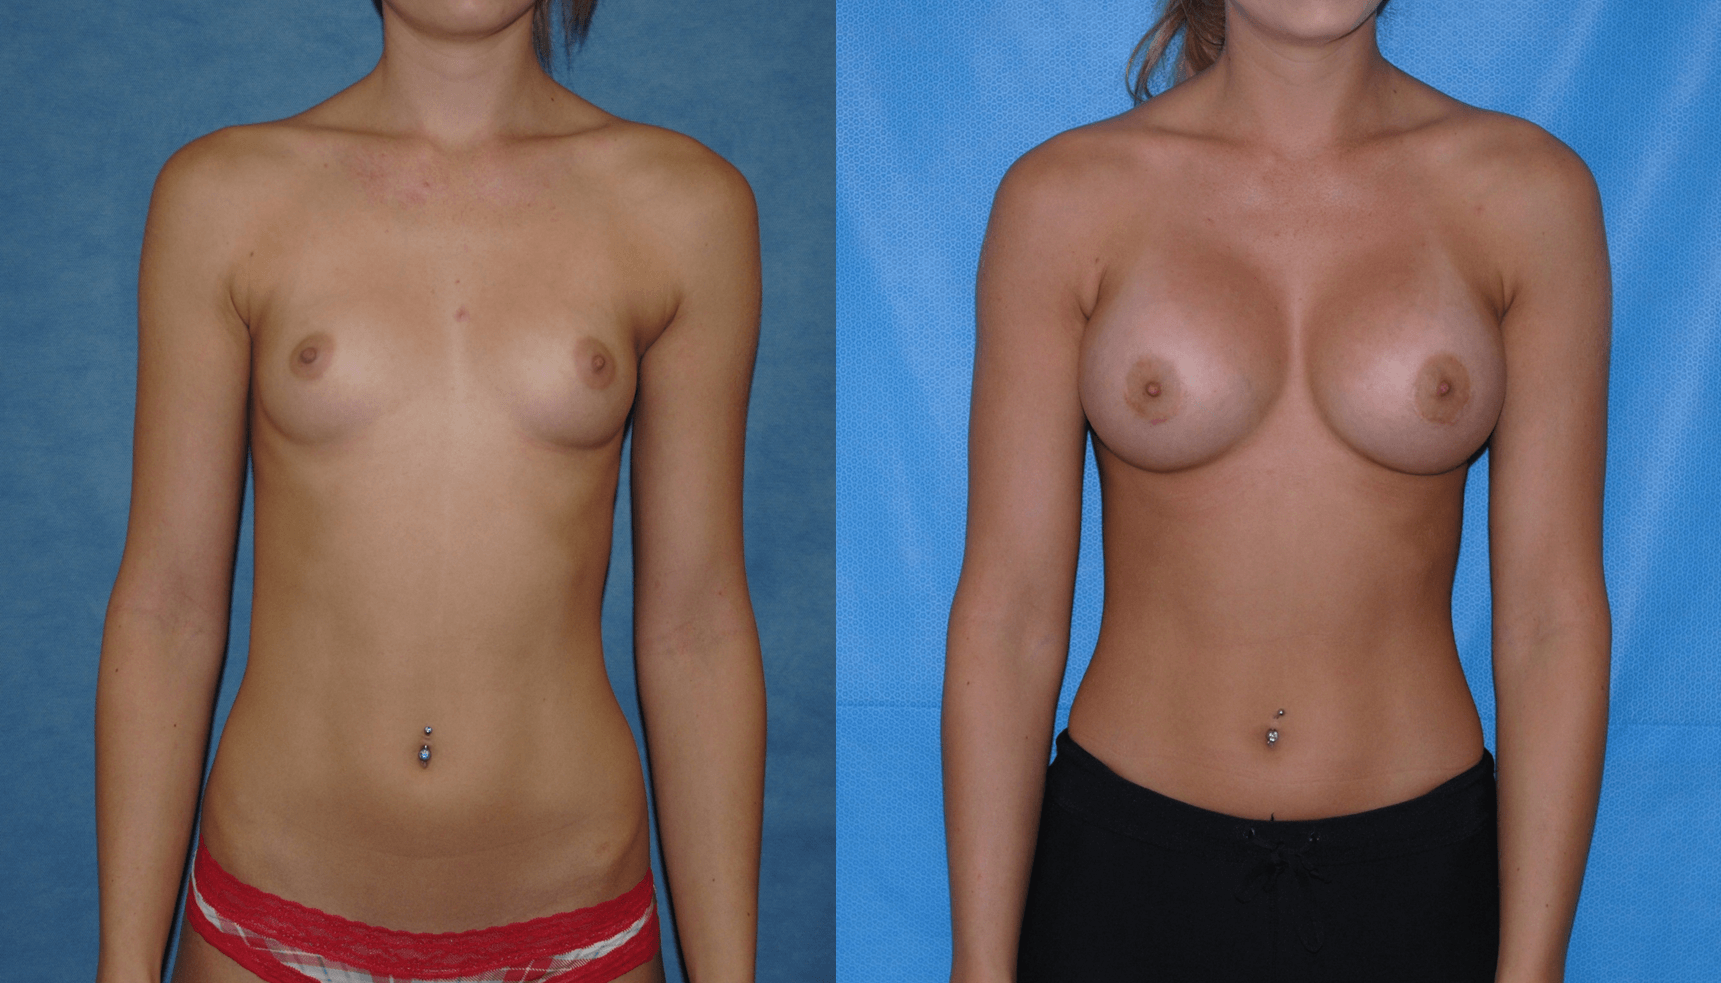 Breast Augmentation: Incision Choices